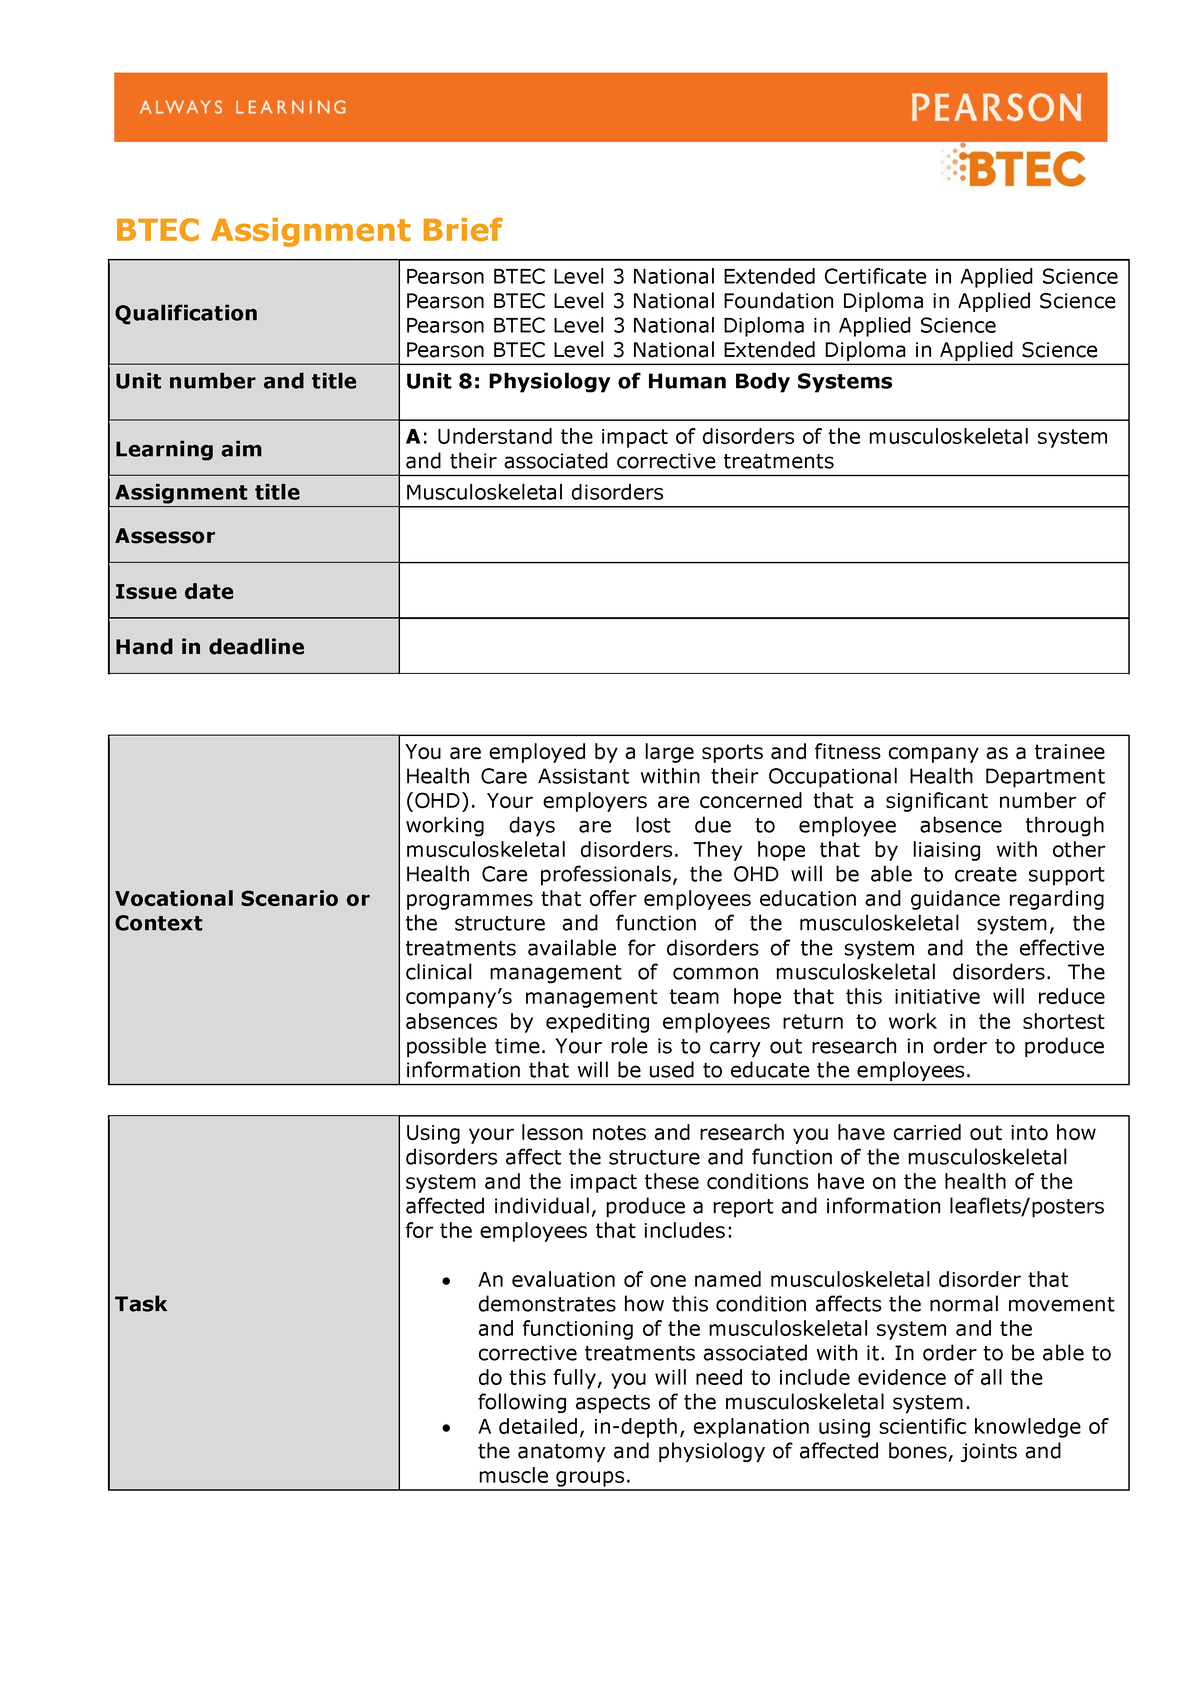 btec assignment brief template